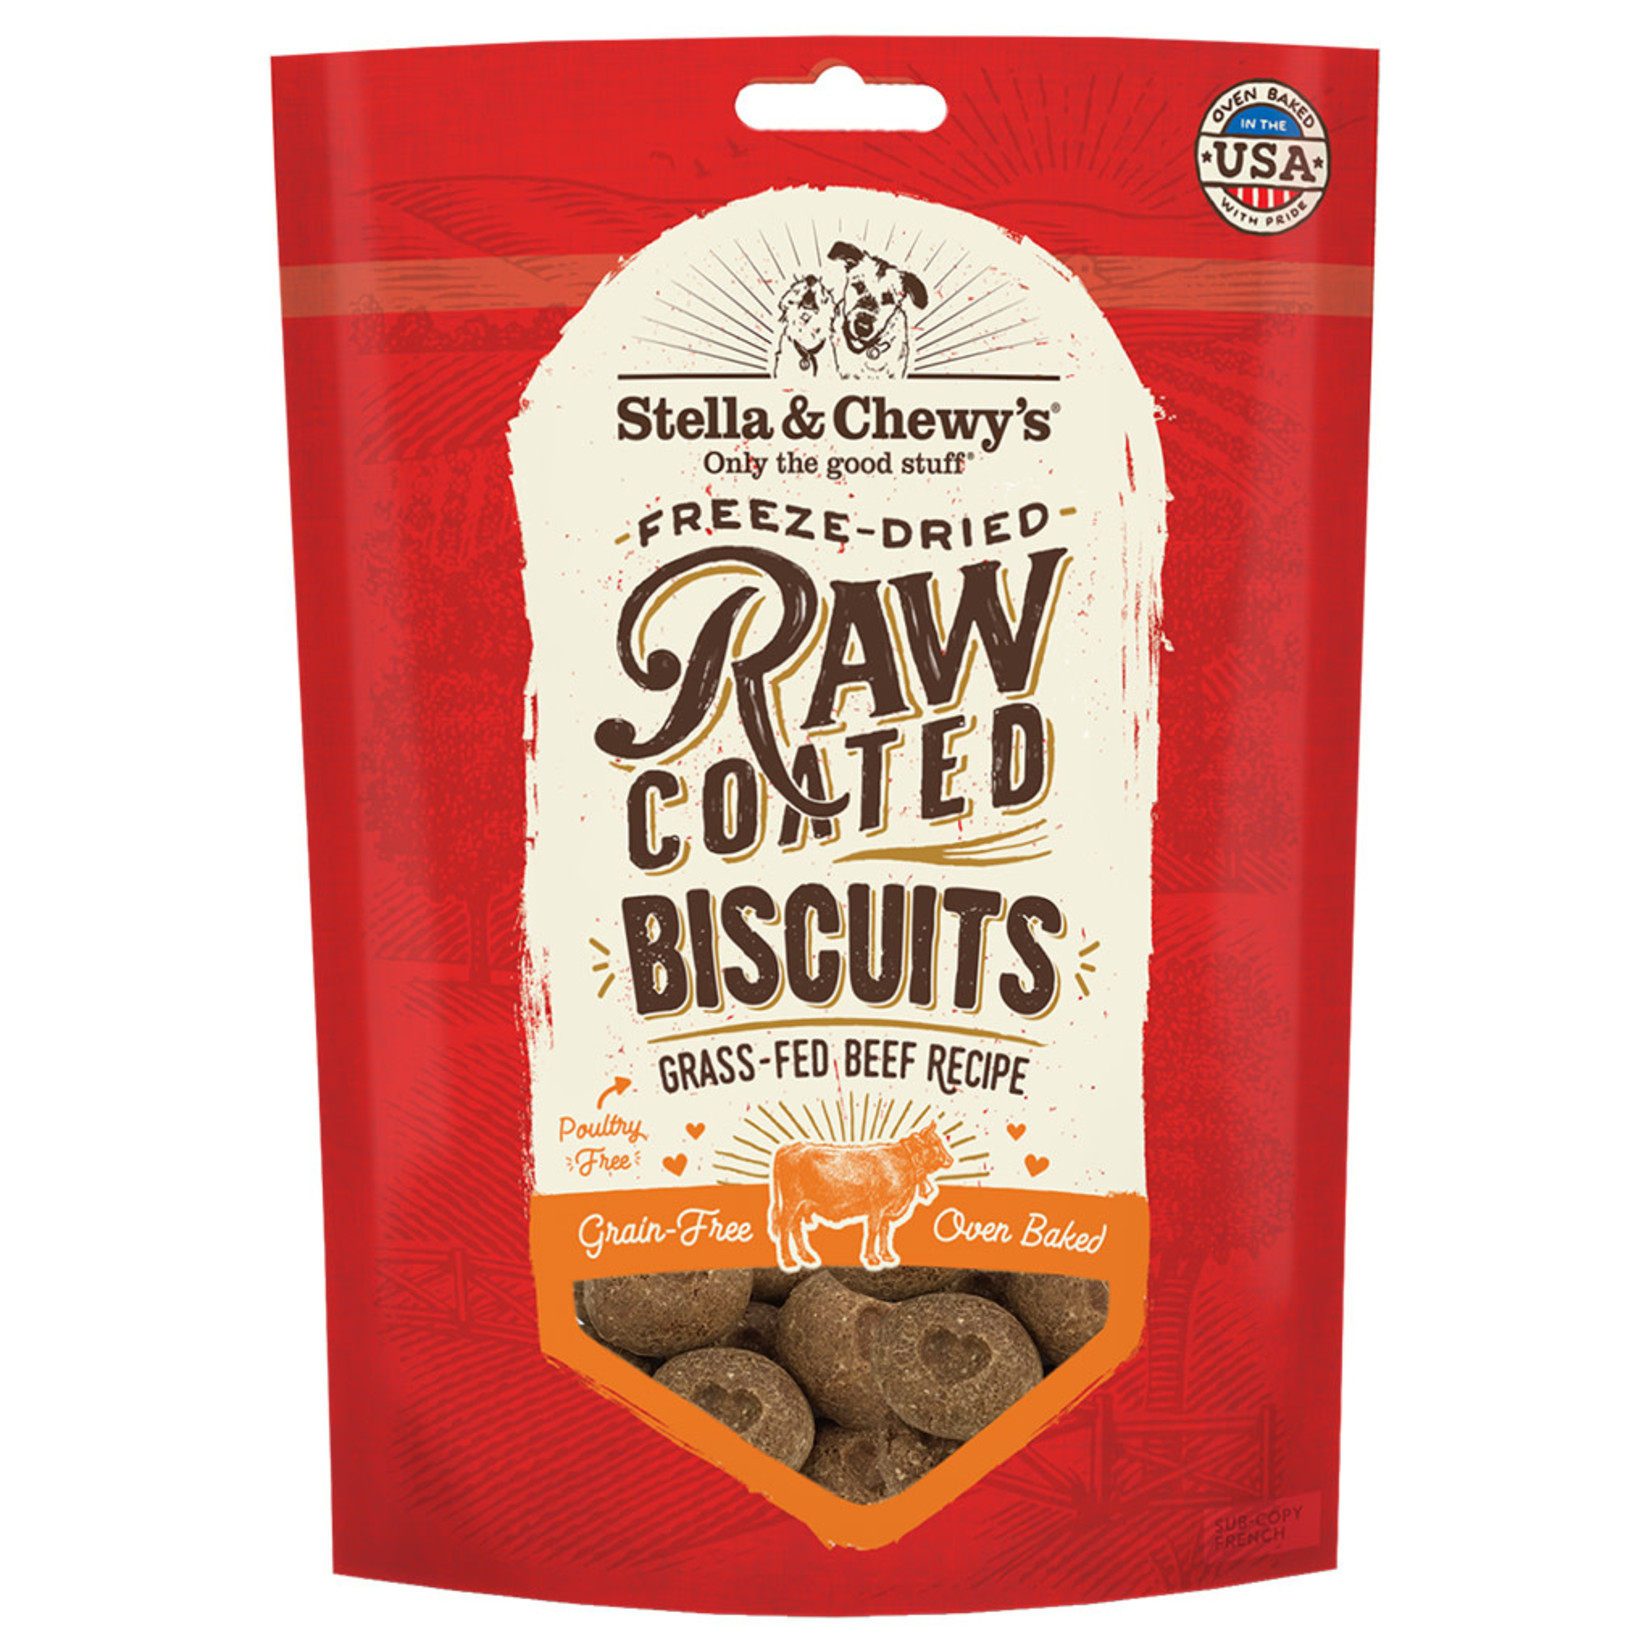 Stella & chewy's SC FD Raw Coated Biscuits 9OZ